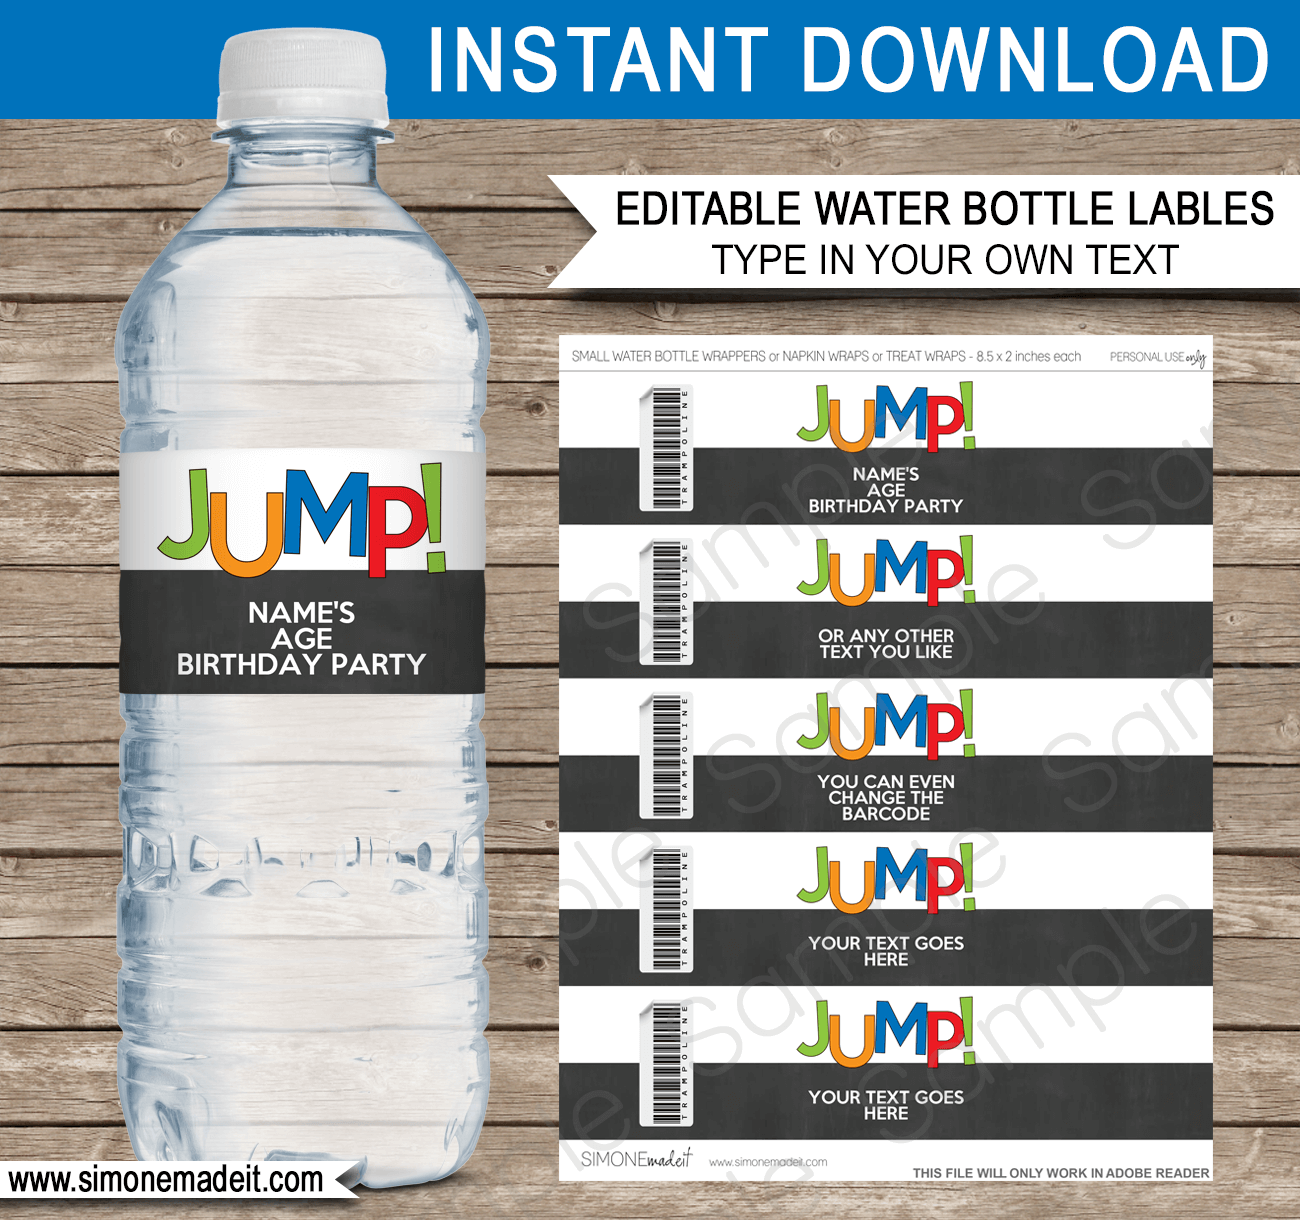 Printable Trampoline Party Water Bottle Labels Template | Birthday Party | Printable Decorations | DIY Editable Text | INSTANT DOWNLOAD via SIMONEmadeit.com